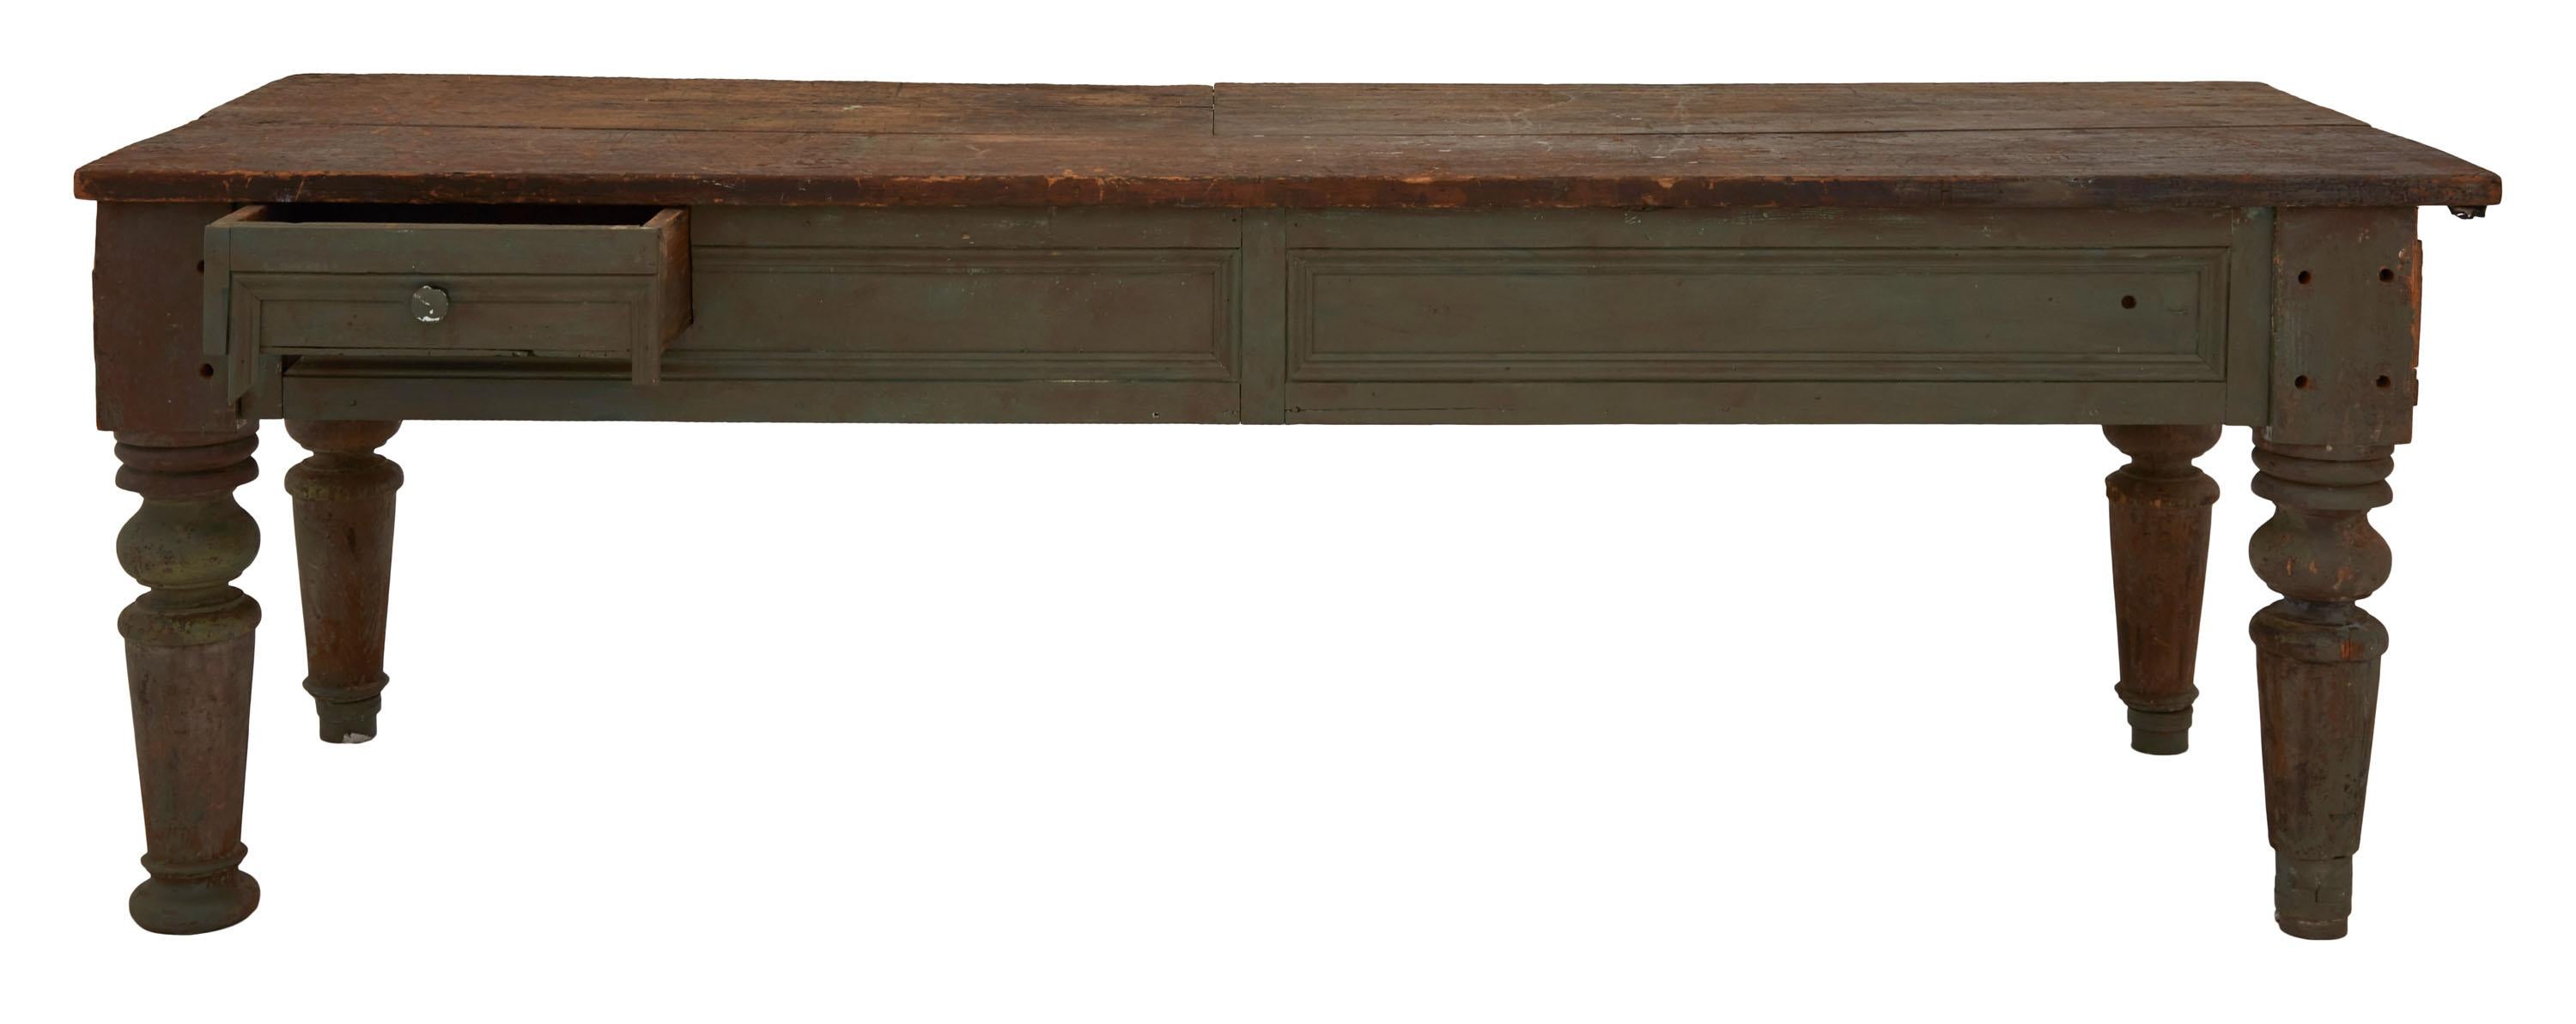 • Patinated painted base as found
• Wood top
• Late 19th century
• American
• Measures: 100.75